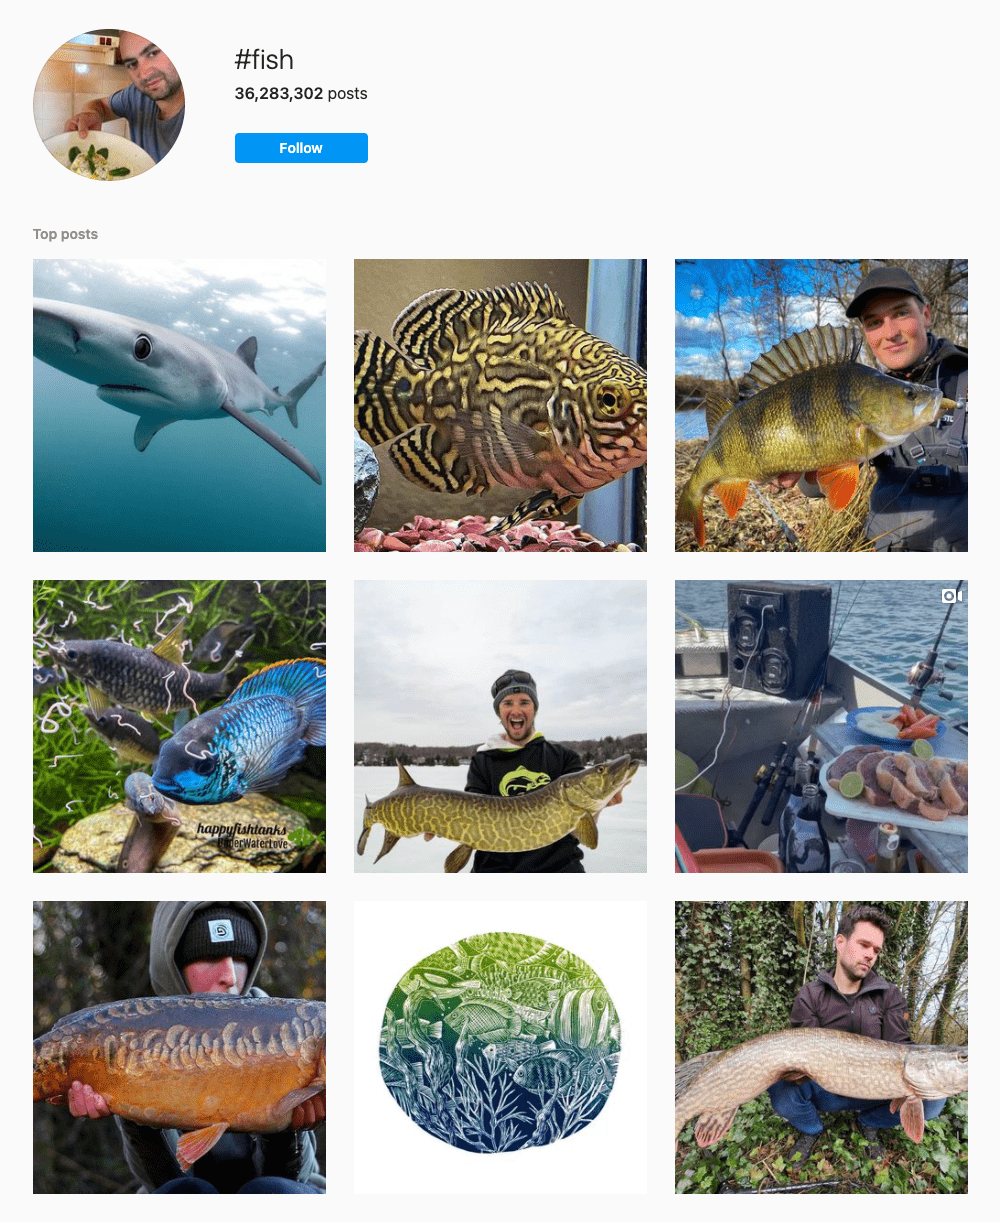 #fish Hashtags for Instagram